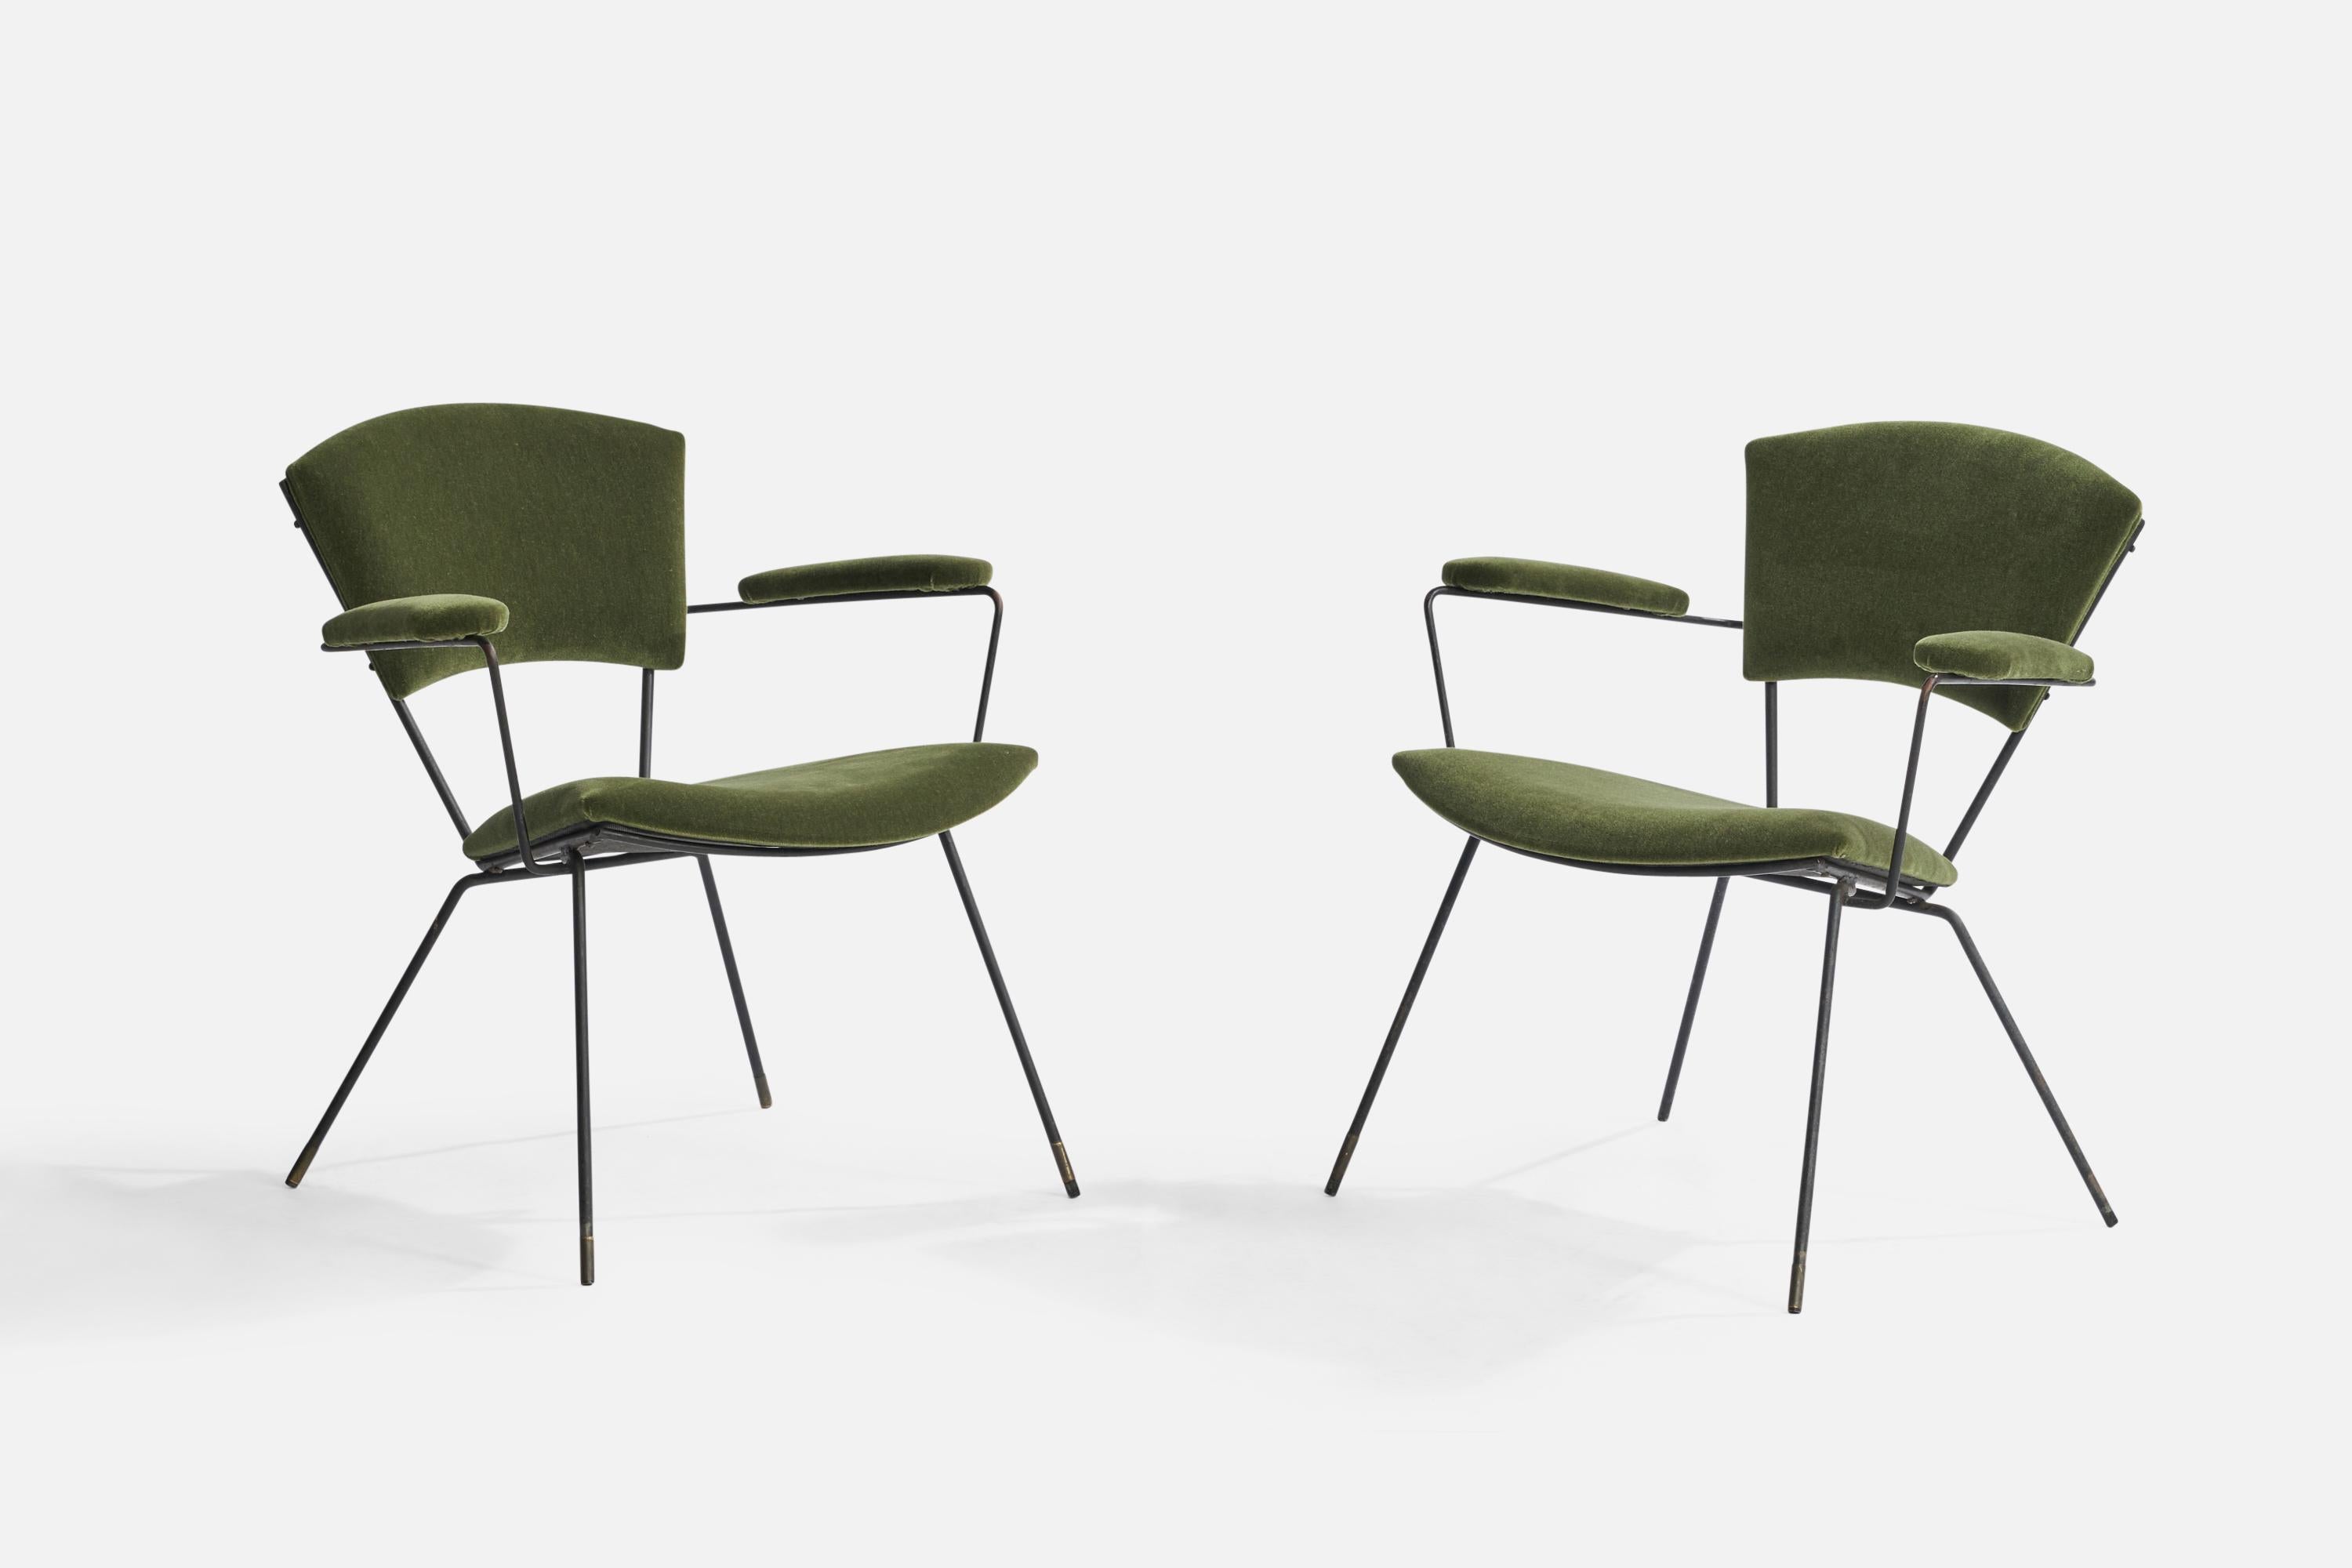 A pair of small black-lacquered iron and green mohair lounge chairs designed and produced in the US, 1950s.

Seat height: 16”

Reupholstered in brand new mohair.